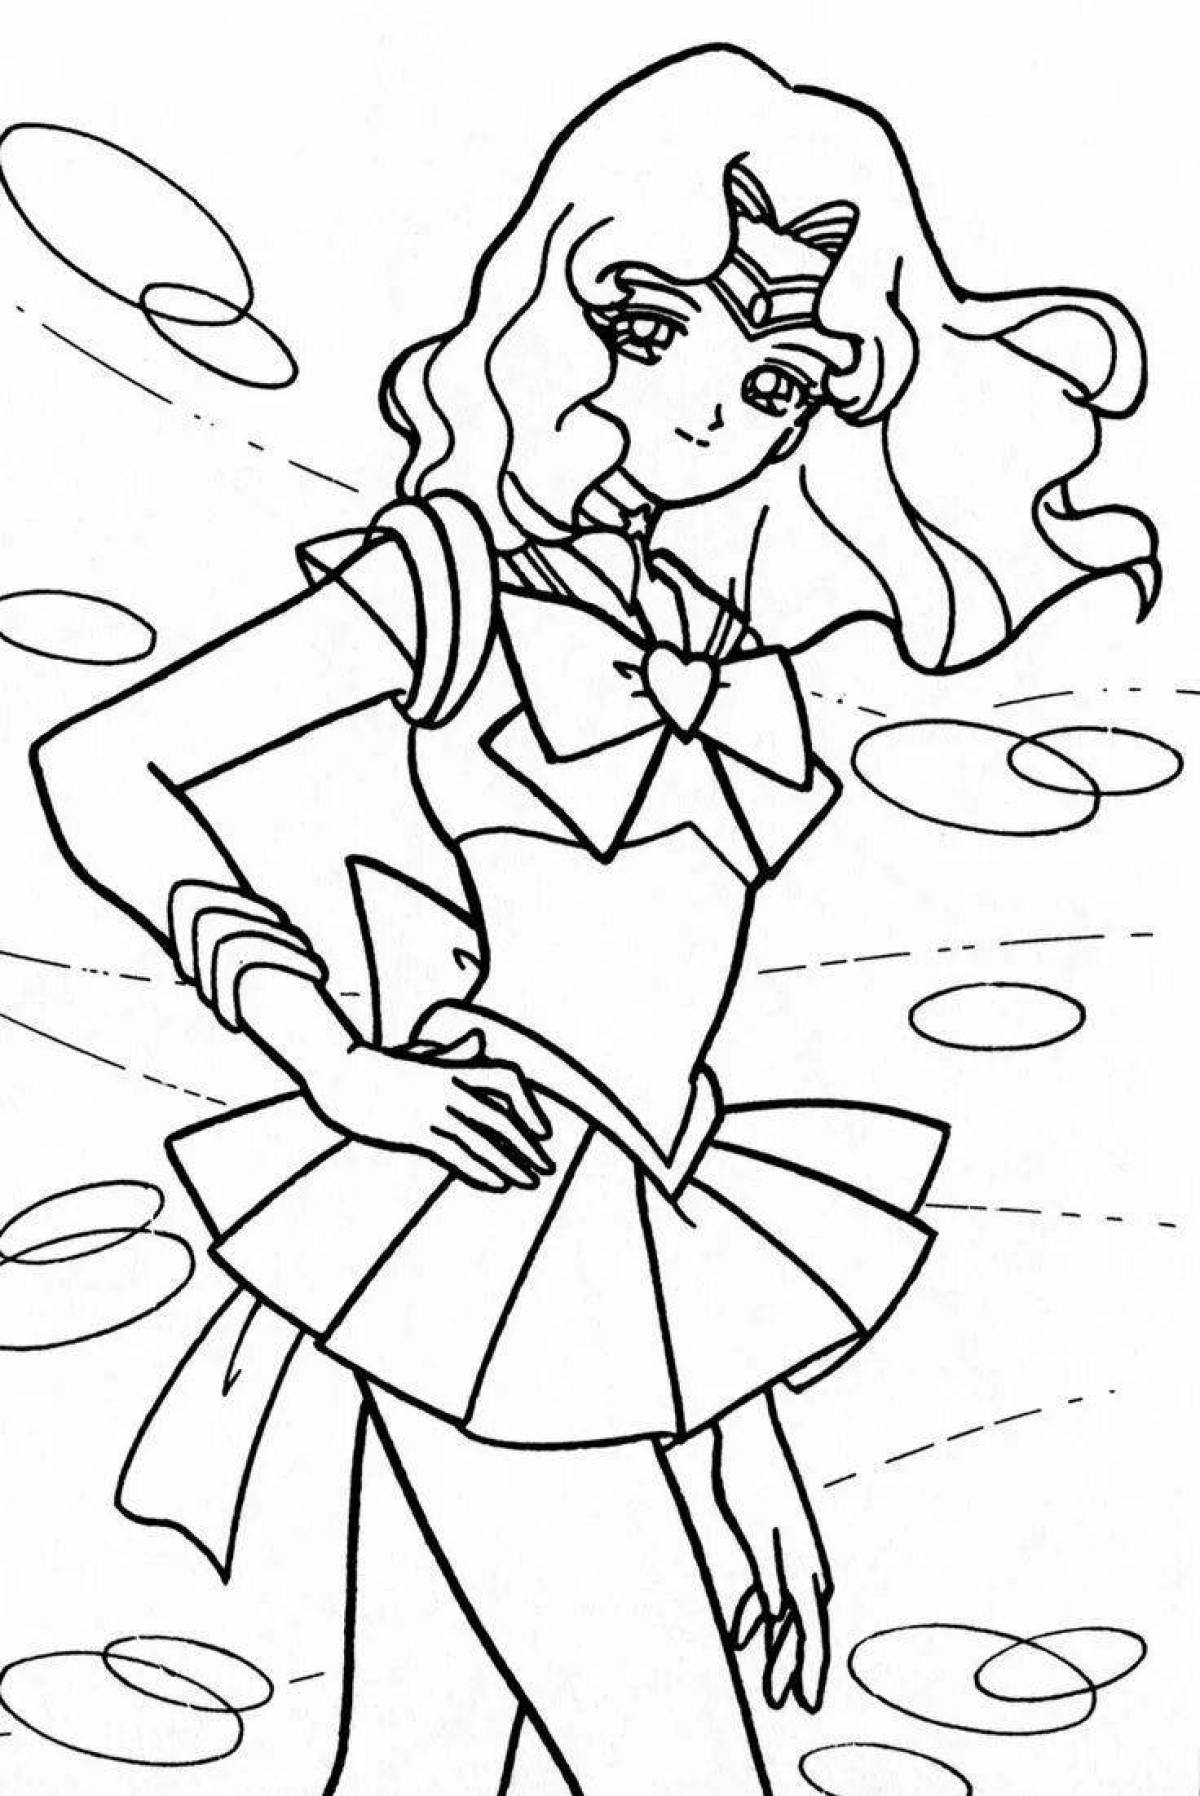 Neptune's funny coloring book